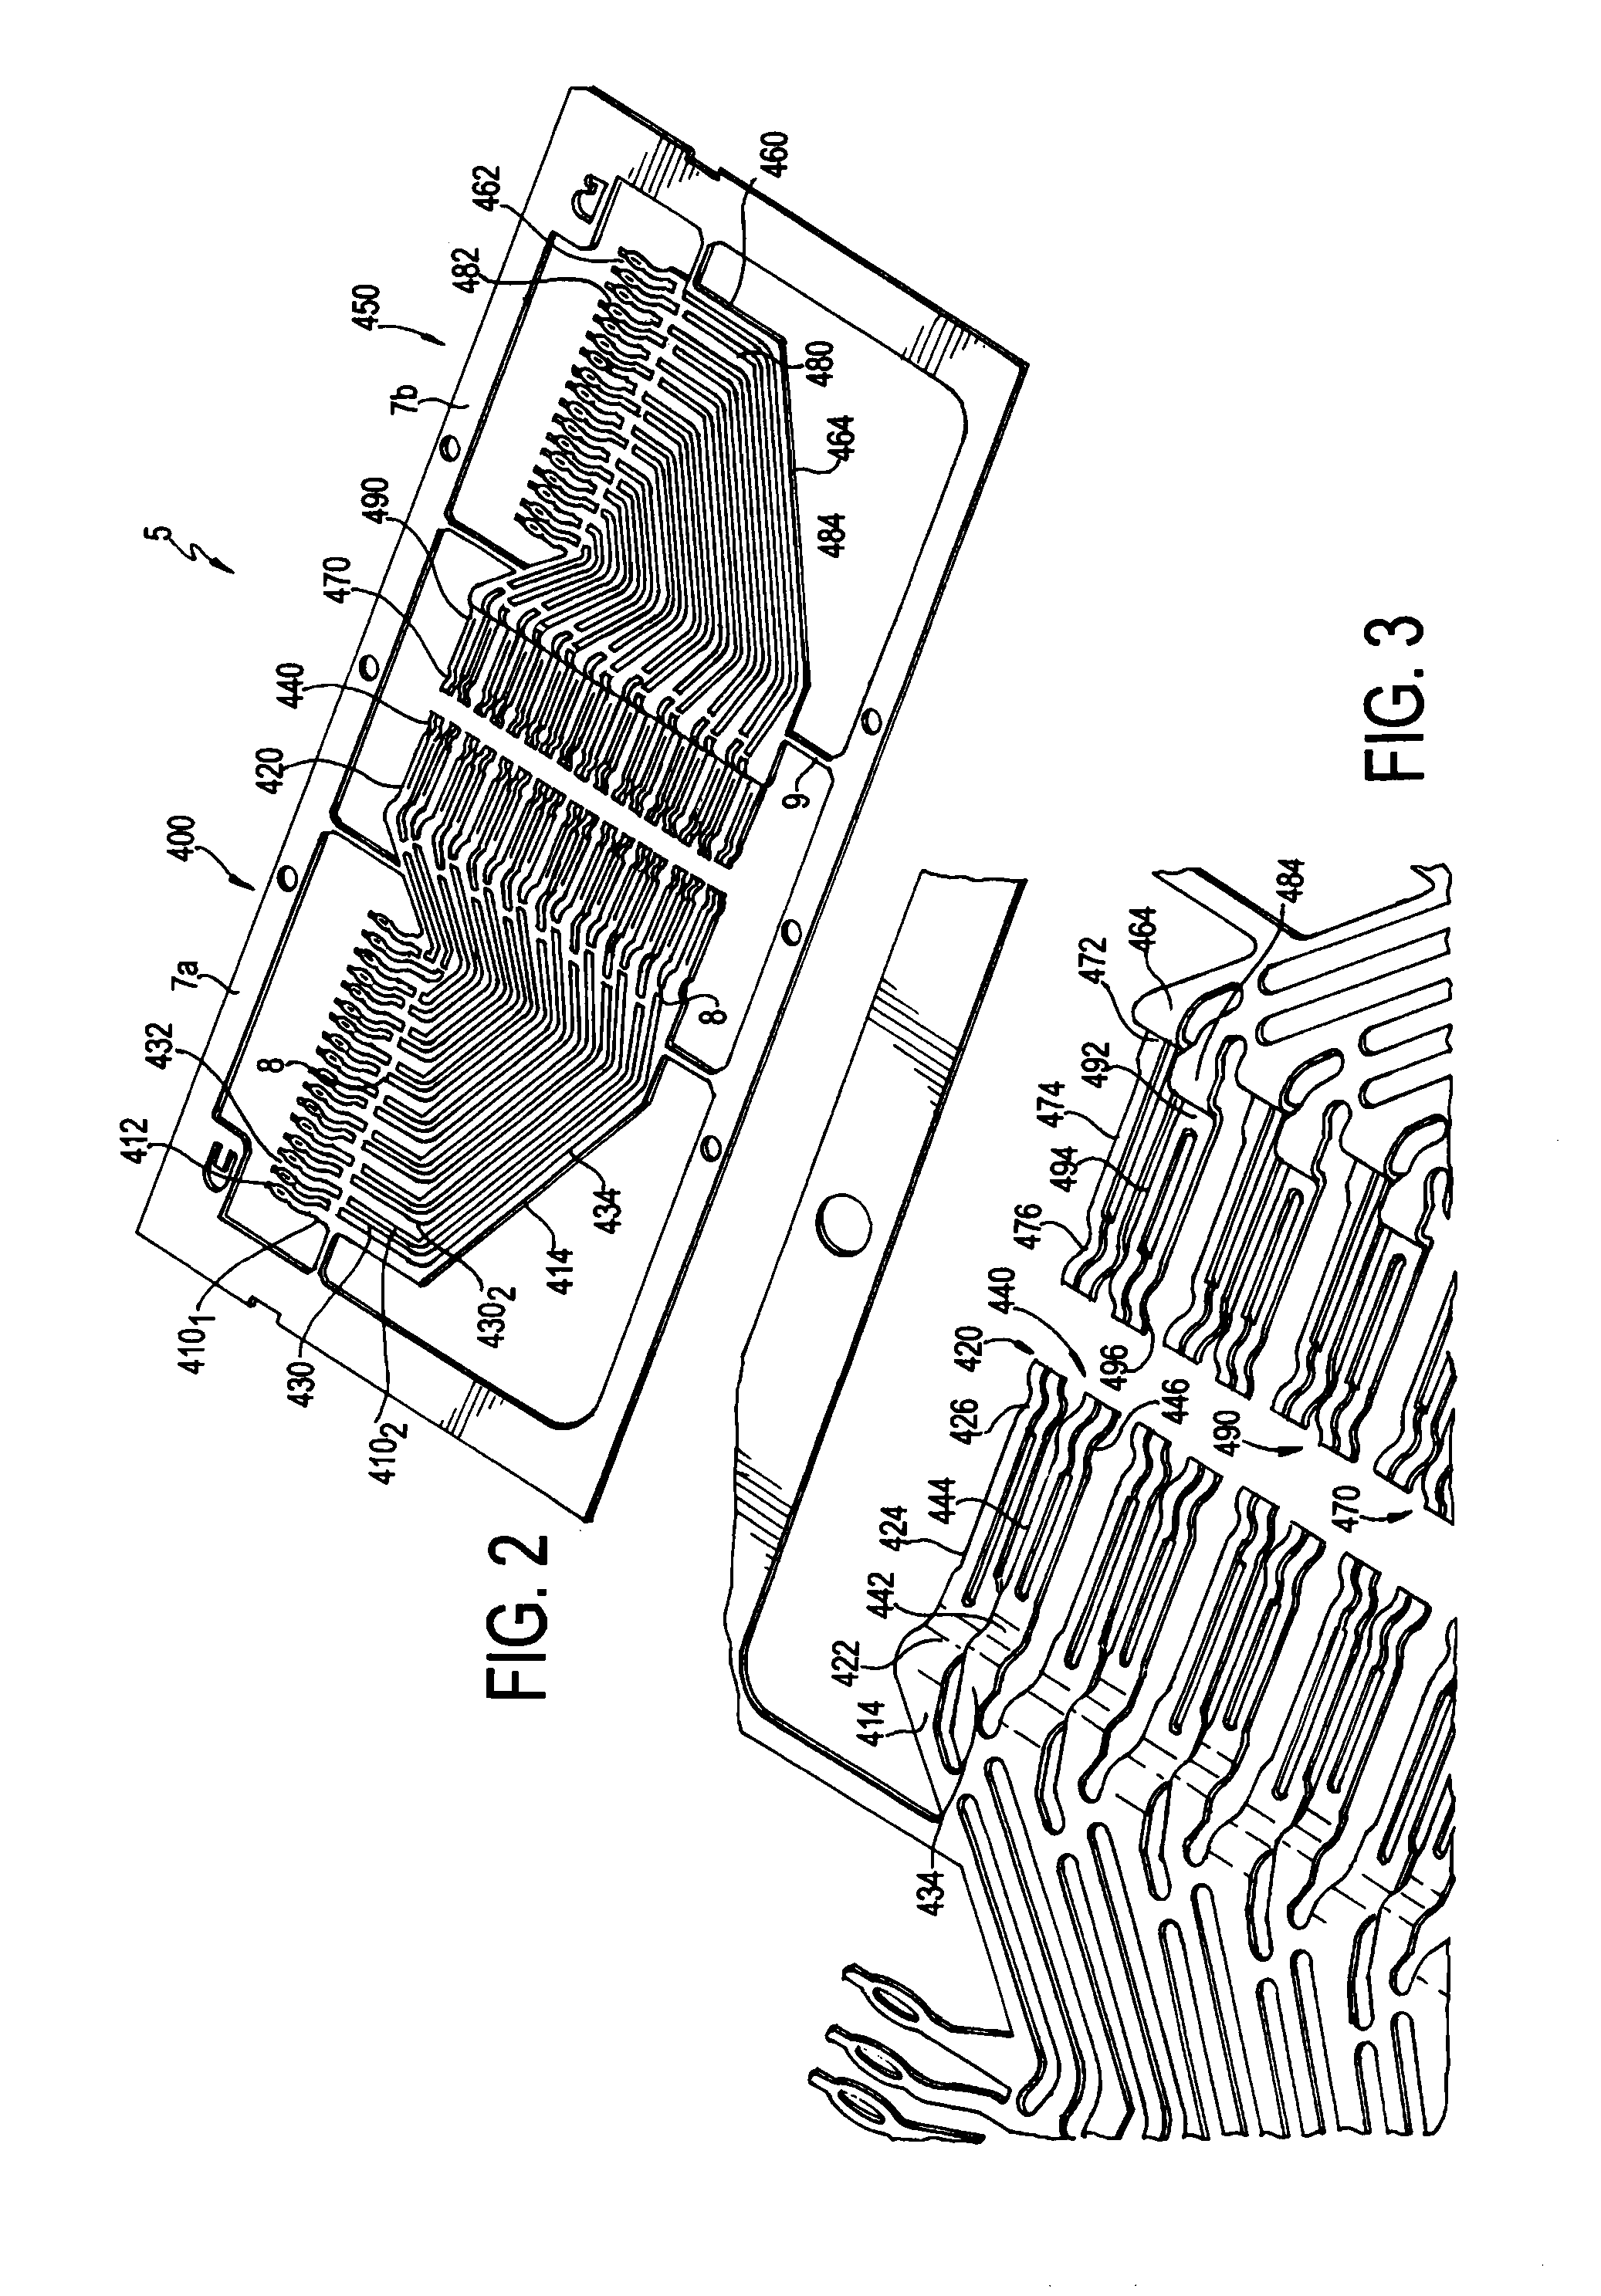 High speed, high density electrical connector